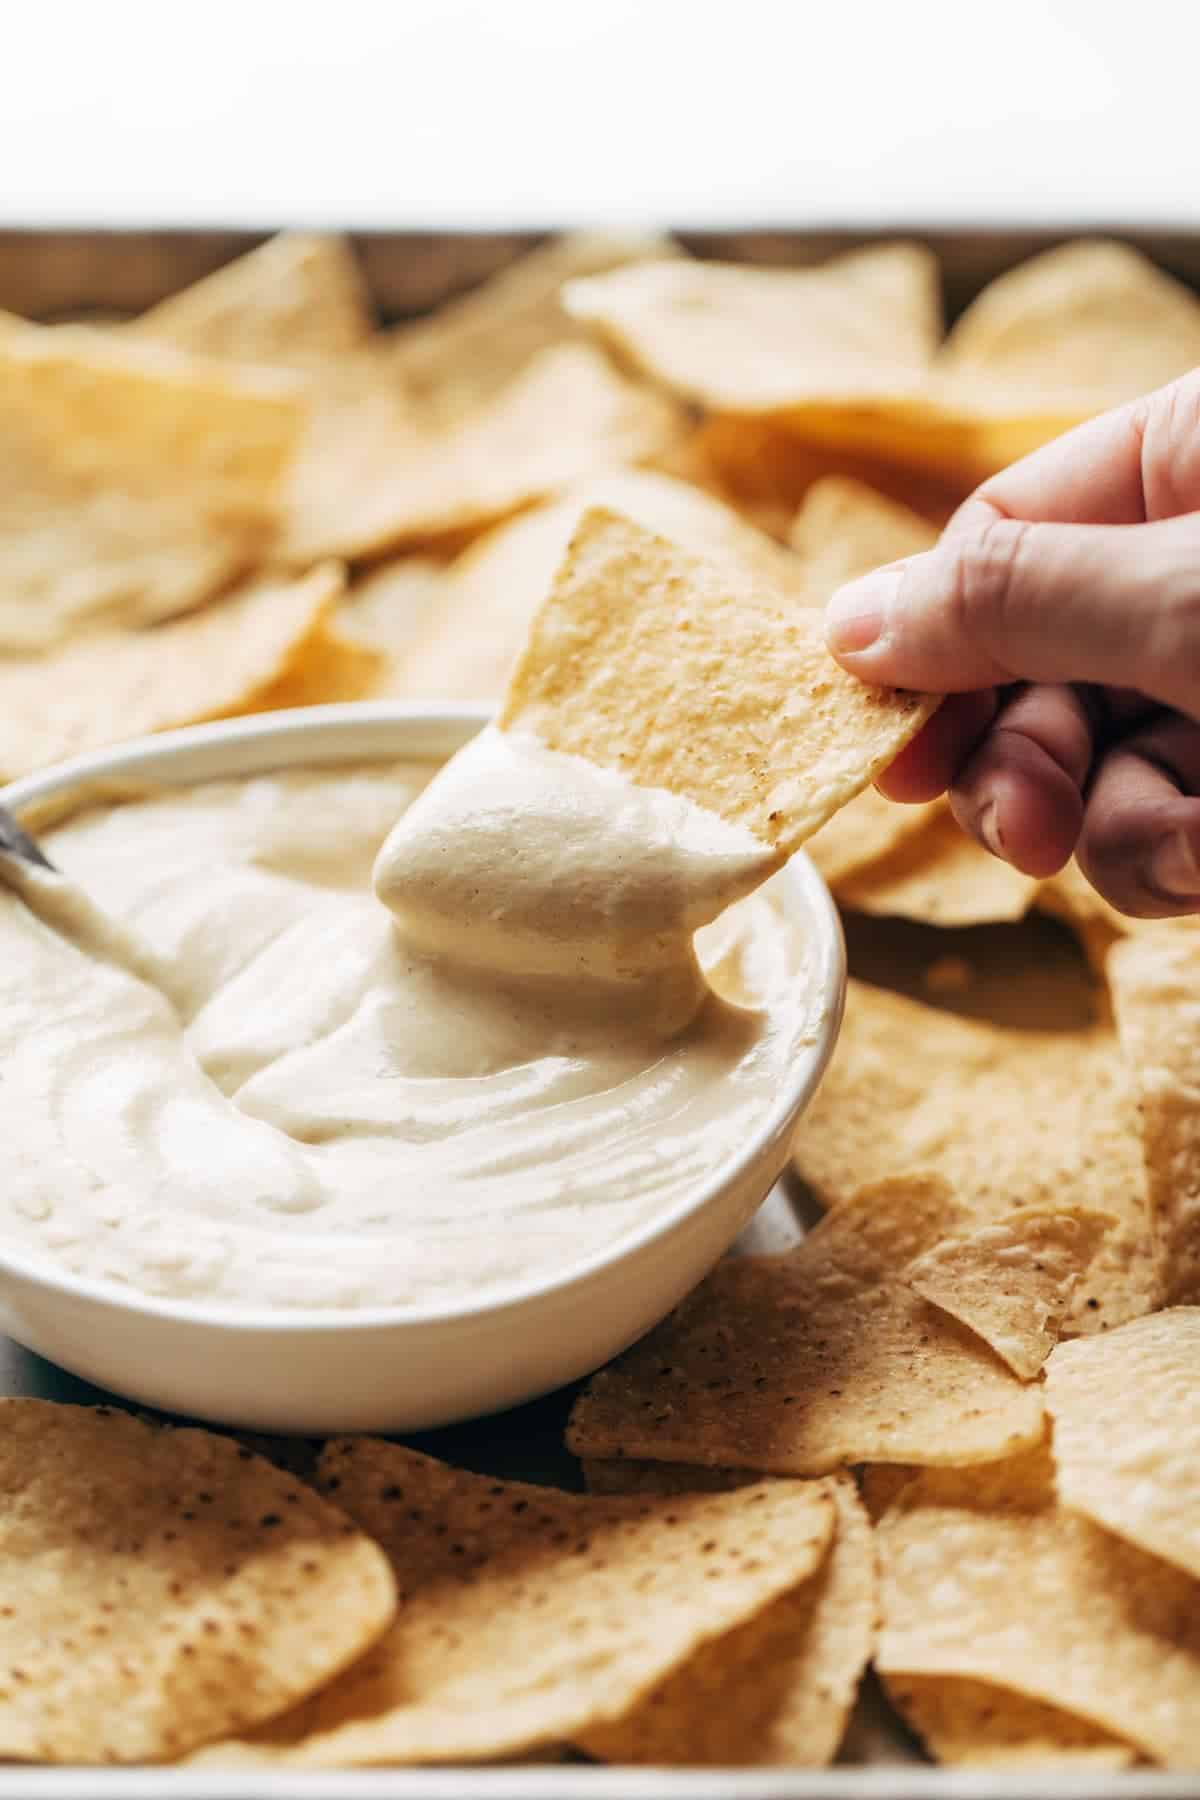 Chip dipped into vegan queso.